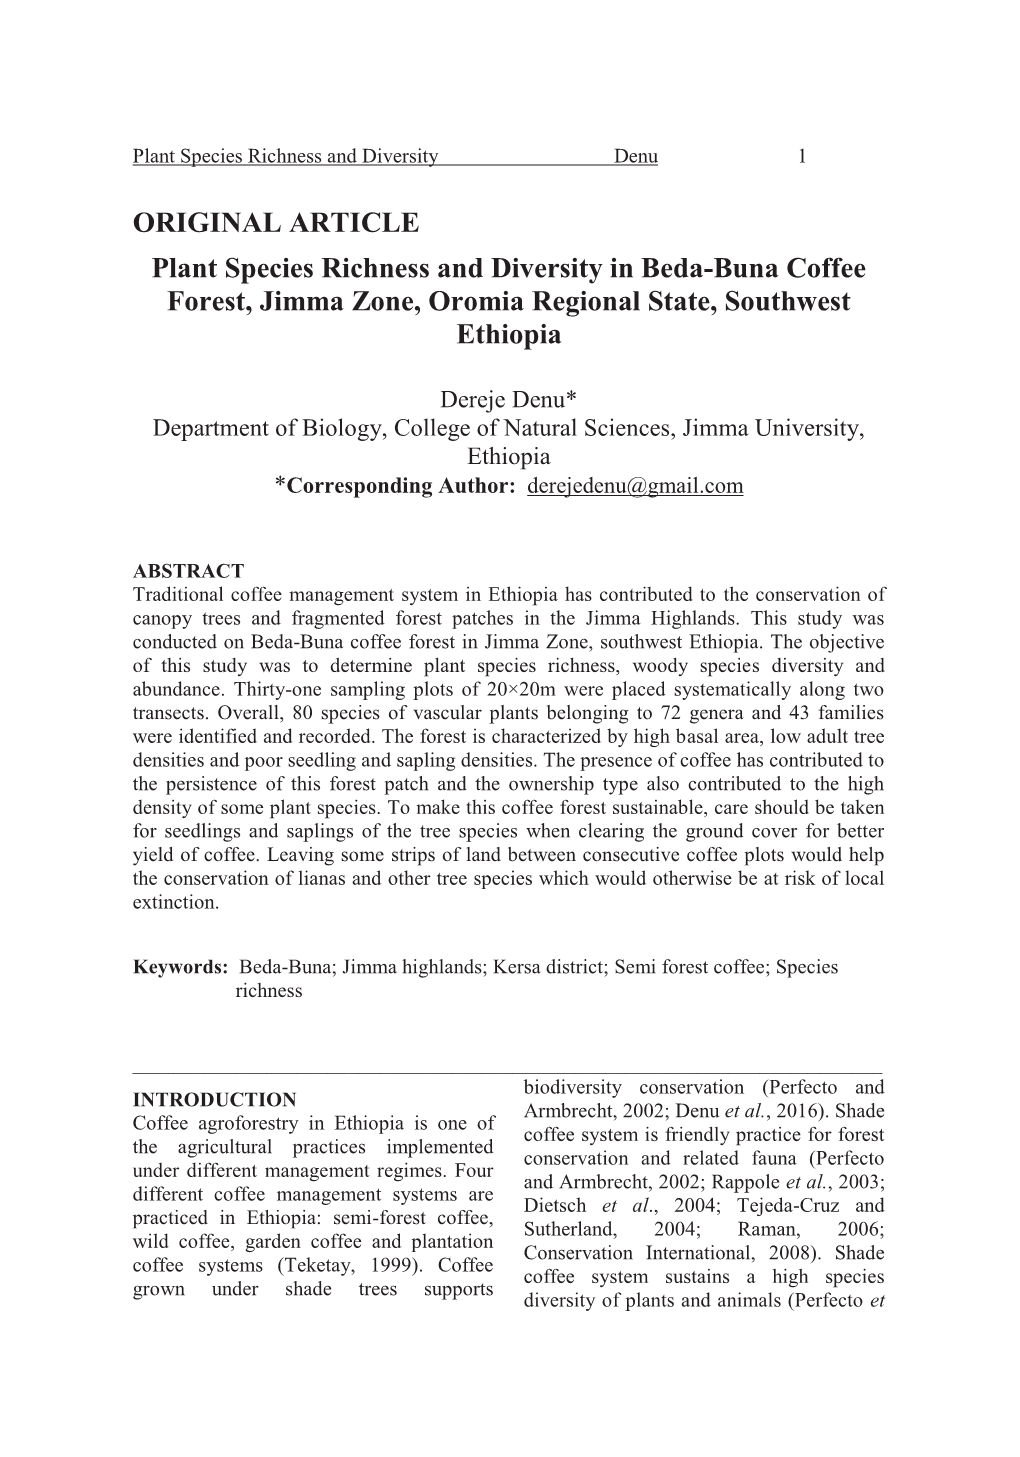 ORIGINAL ARTICLE Plant Species Richness and Diversity in Beda-Buna Coffee Forest, Jimma Zone, Oromia Regional State, Southwest Ethiopia